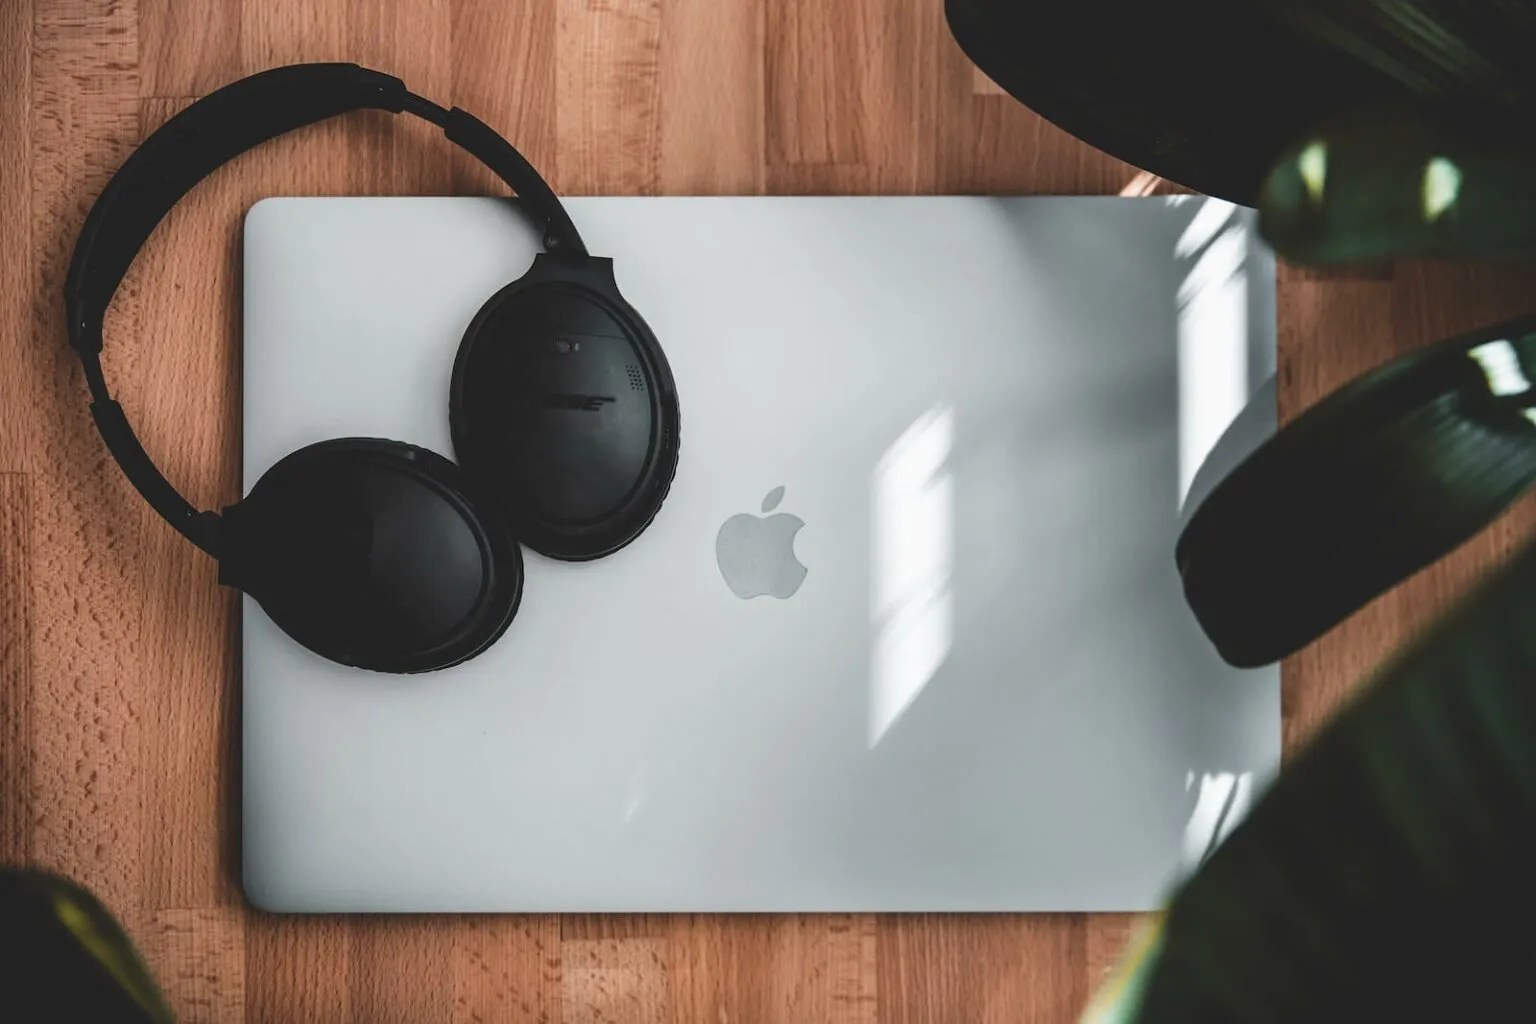 How to Connect Bose Headphones to a Mac